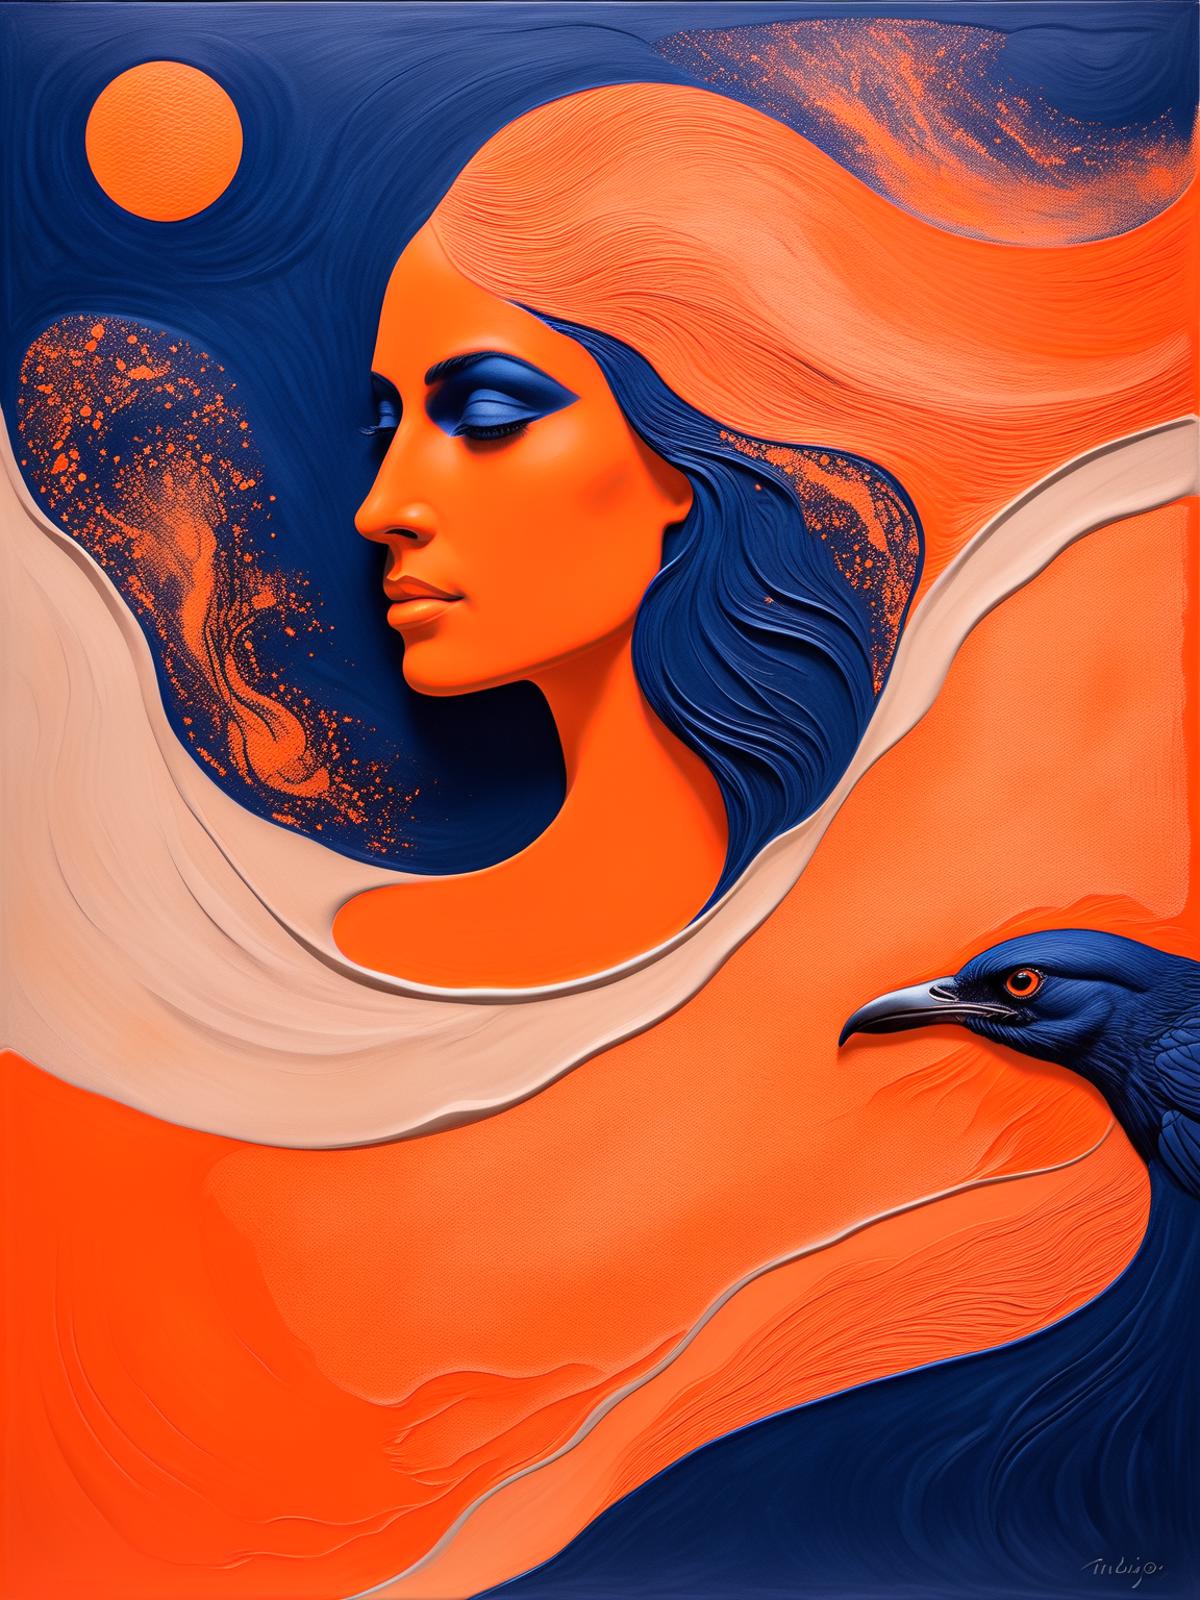 Artistic Painting of a Woman and a Bird on a Vibrant Orange Background